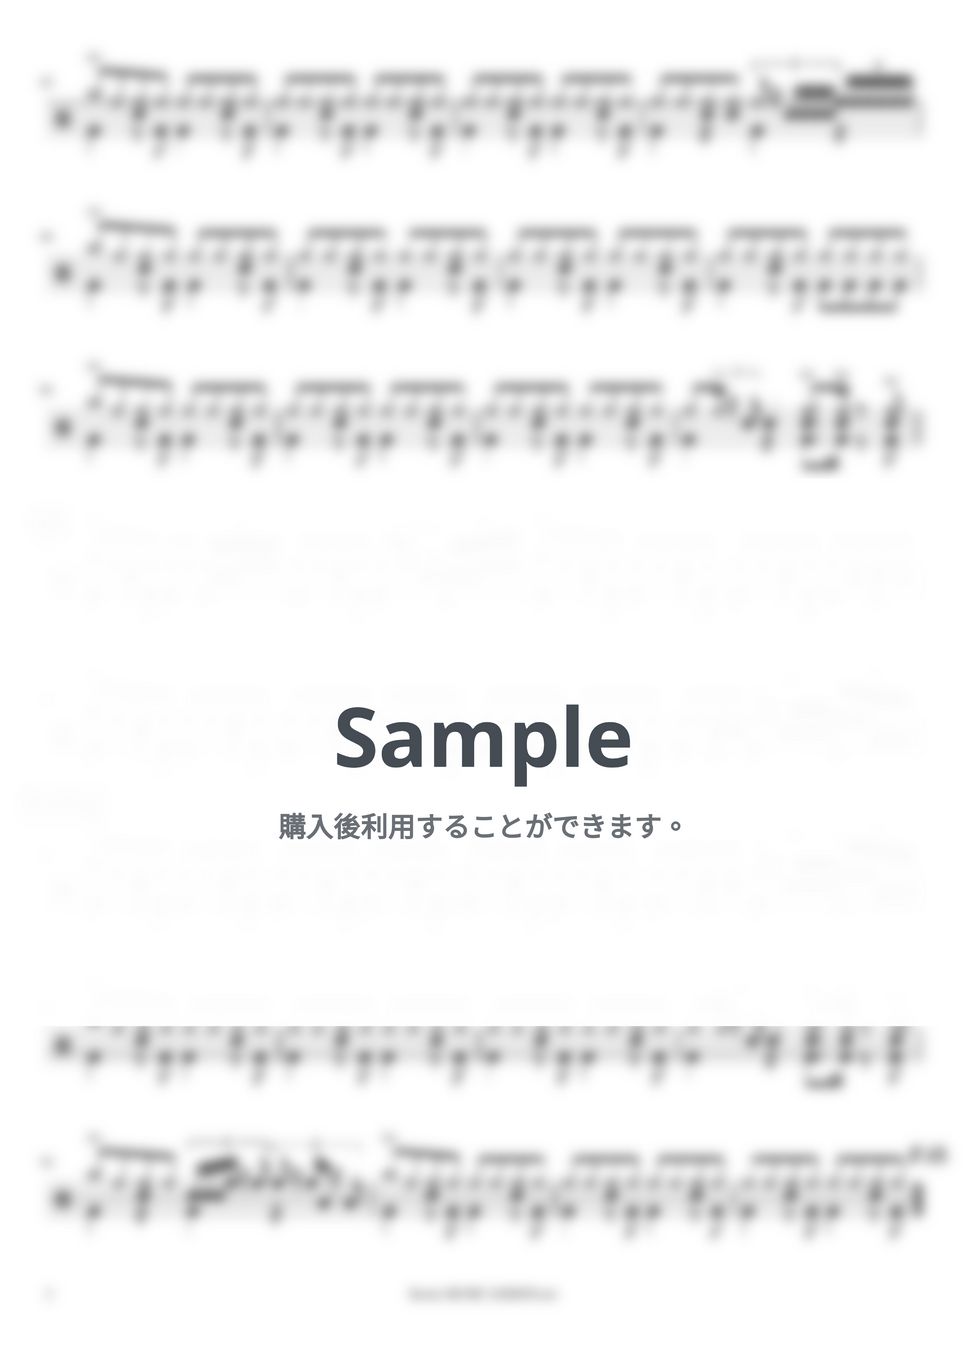 Procol Harum - 青い影（A Whiter Shade of Pale）【Drums】 by Kornz MUSIC LESSON.net